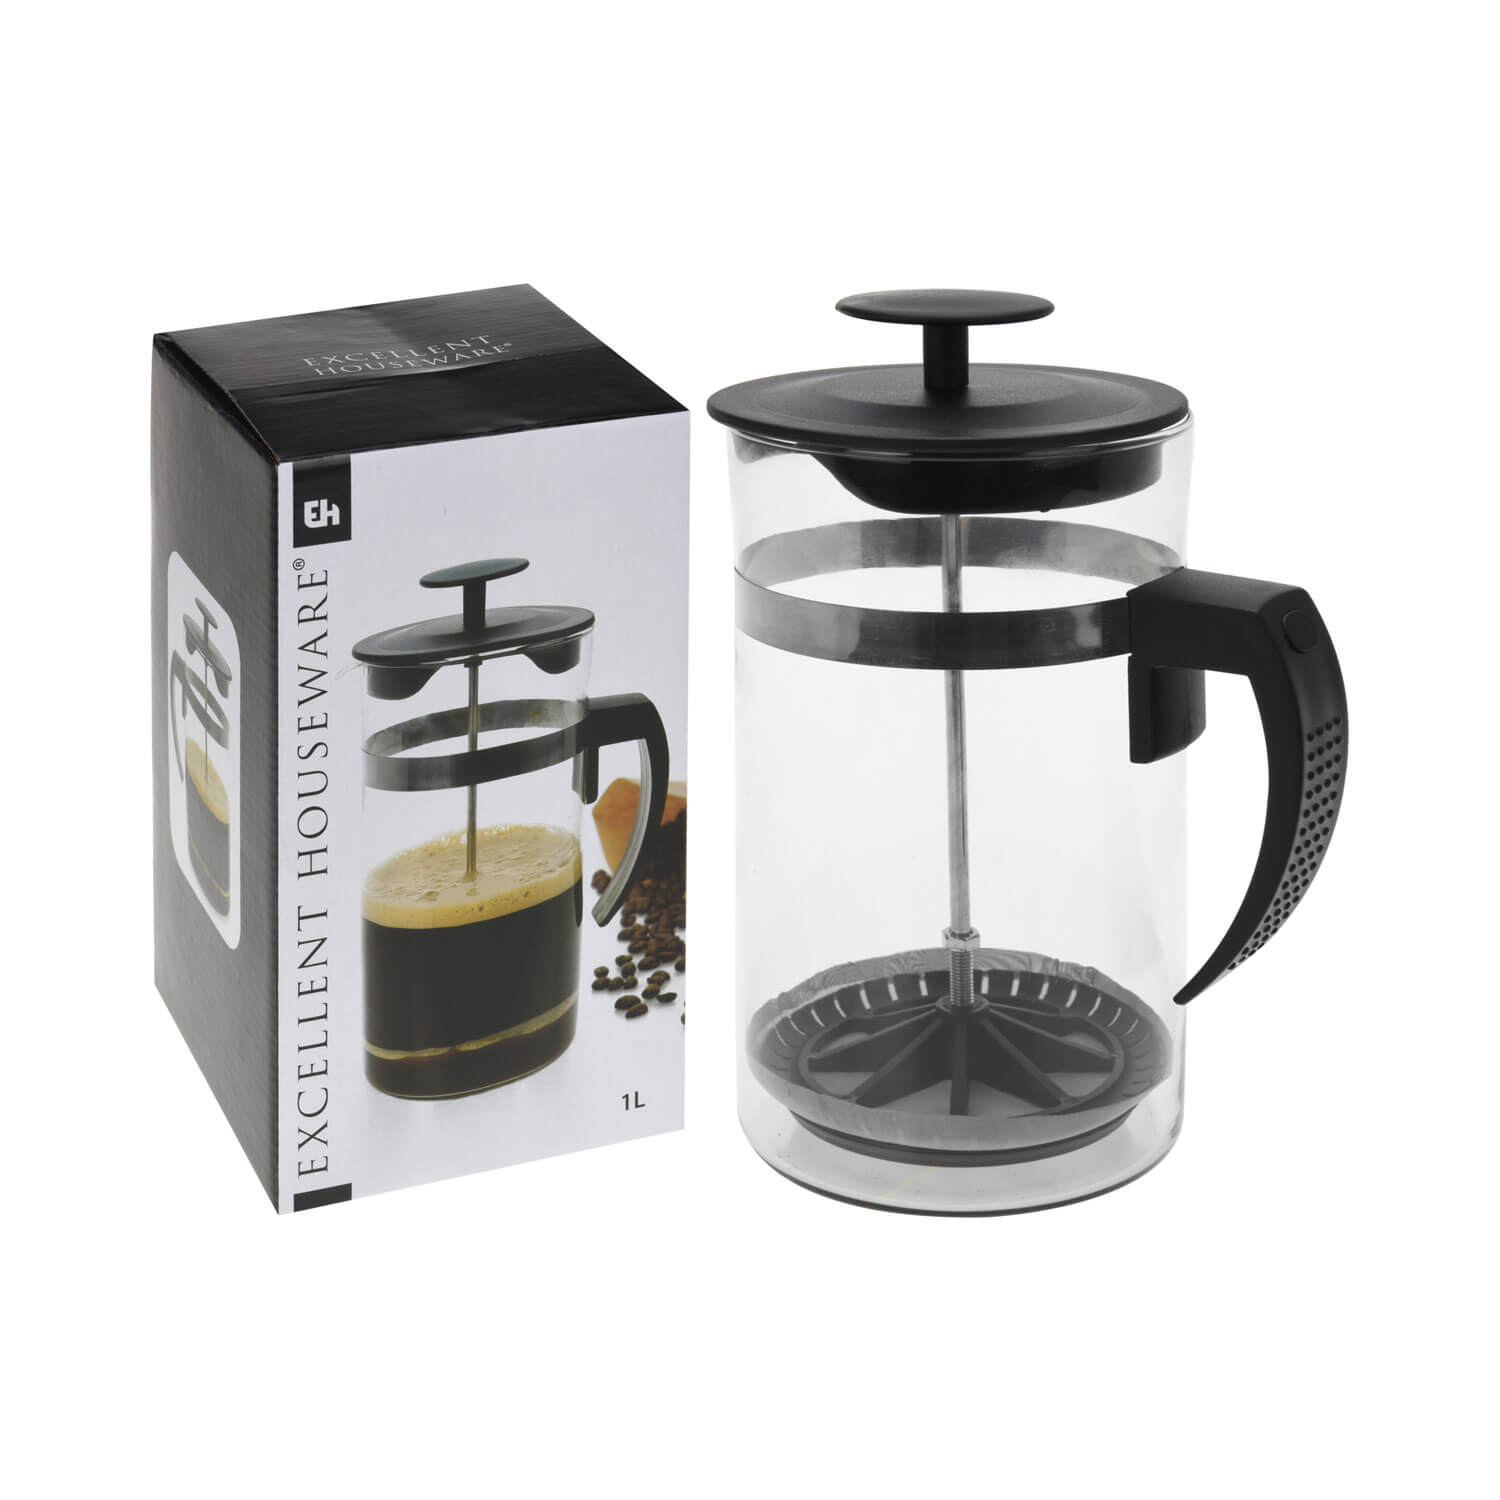 The Home Kitchen Cafetiere French Press Coffee Maker 1 Shaws Department Stores